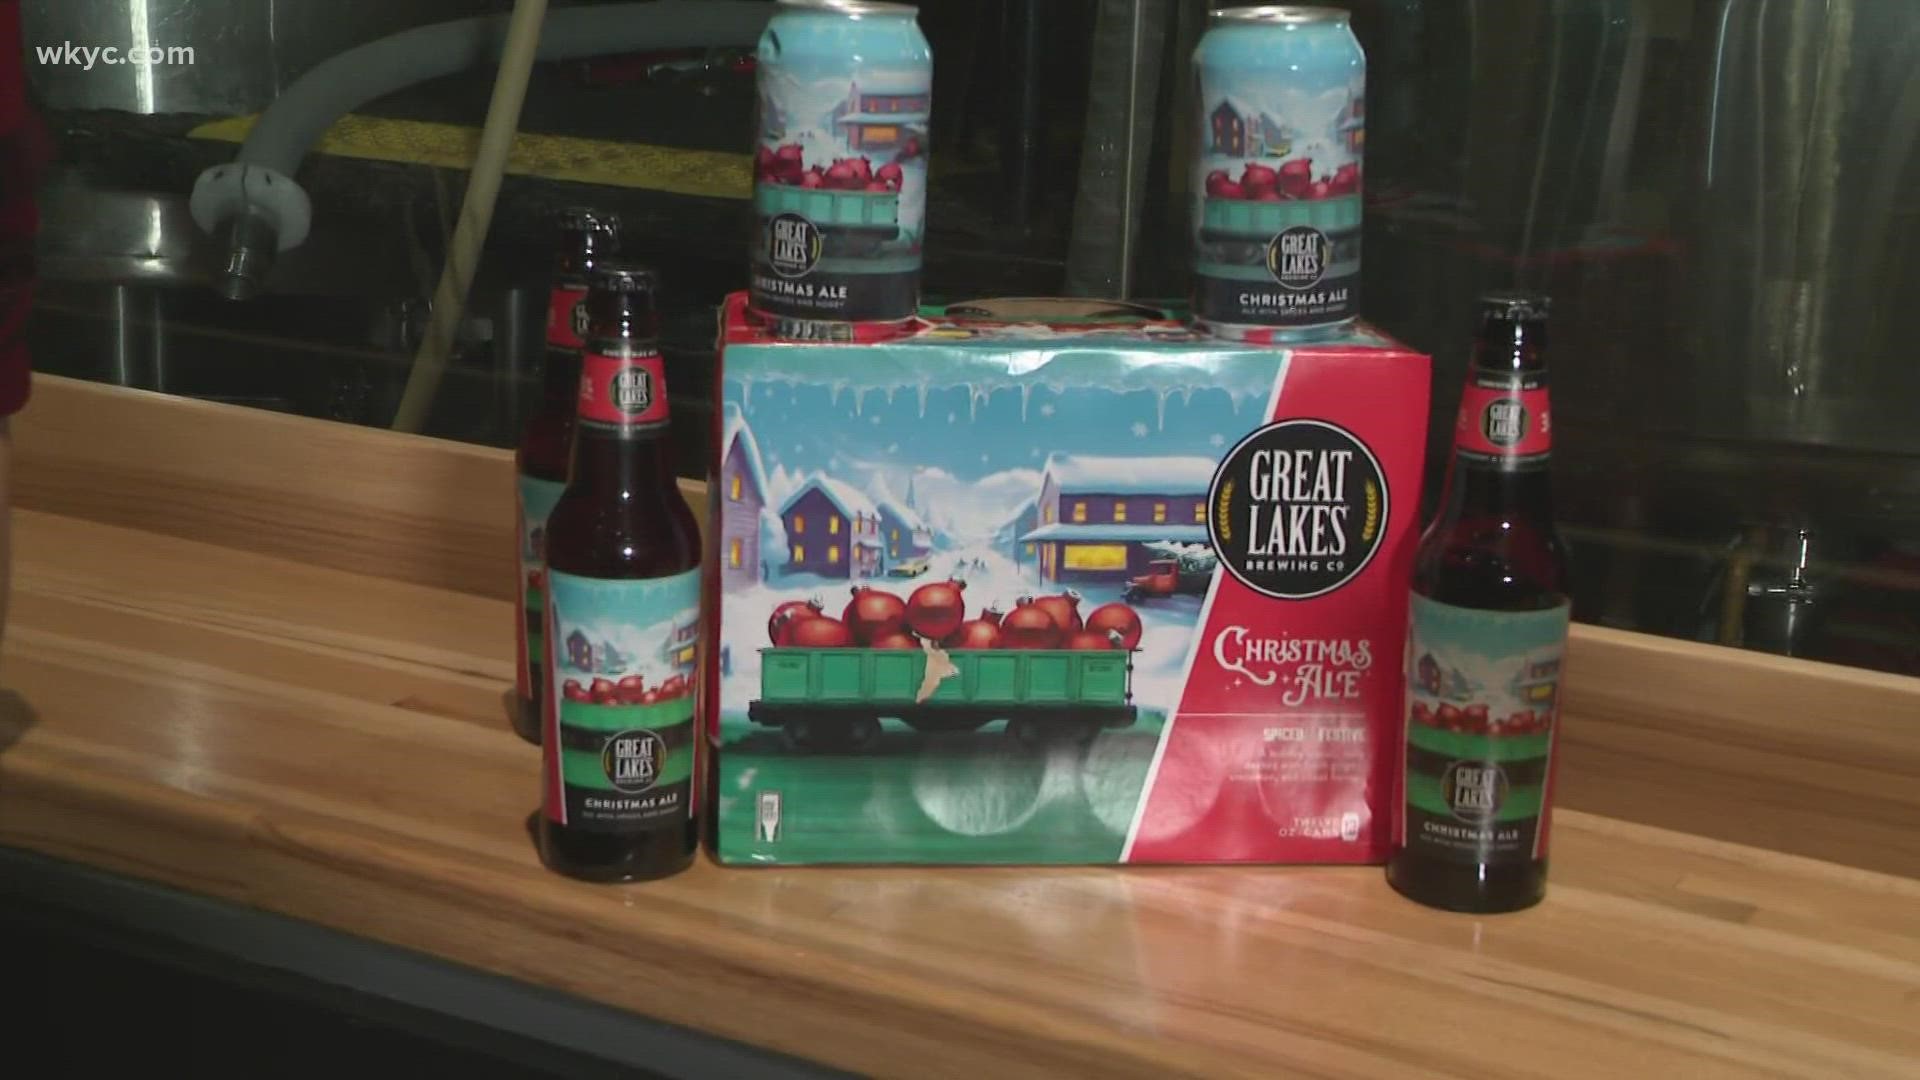 It's back! The Great Lakes Brewing Company is tapping their Christmas Ale during a 'First Pour' event.